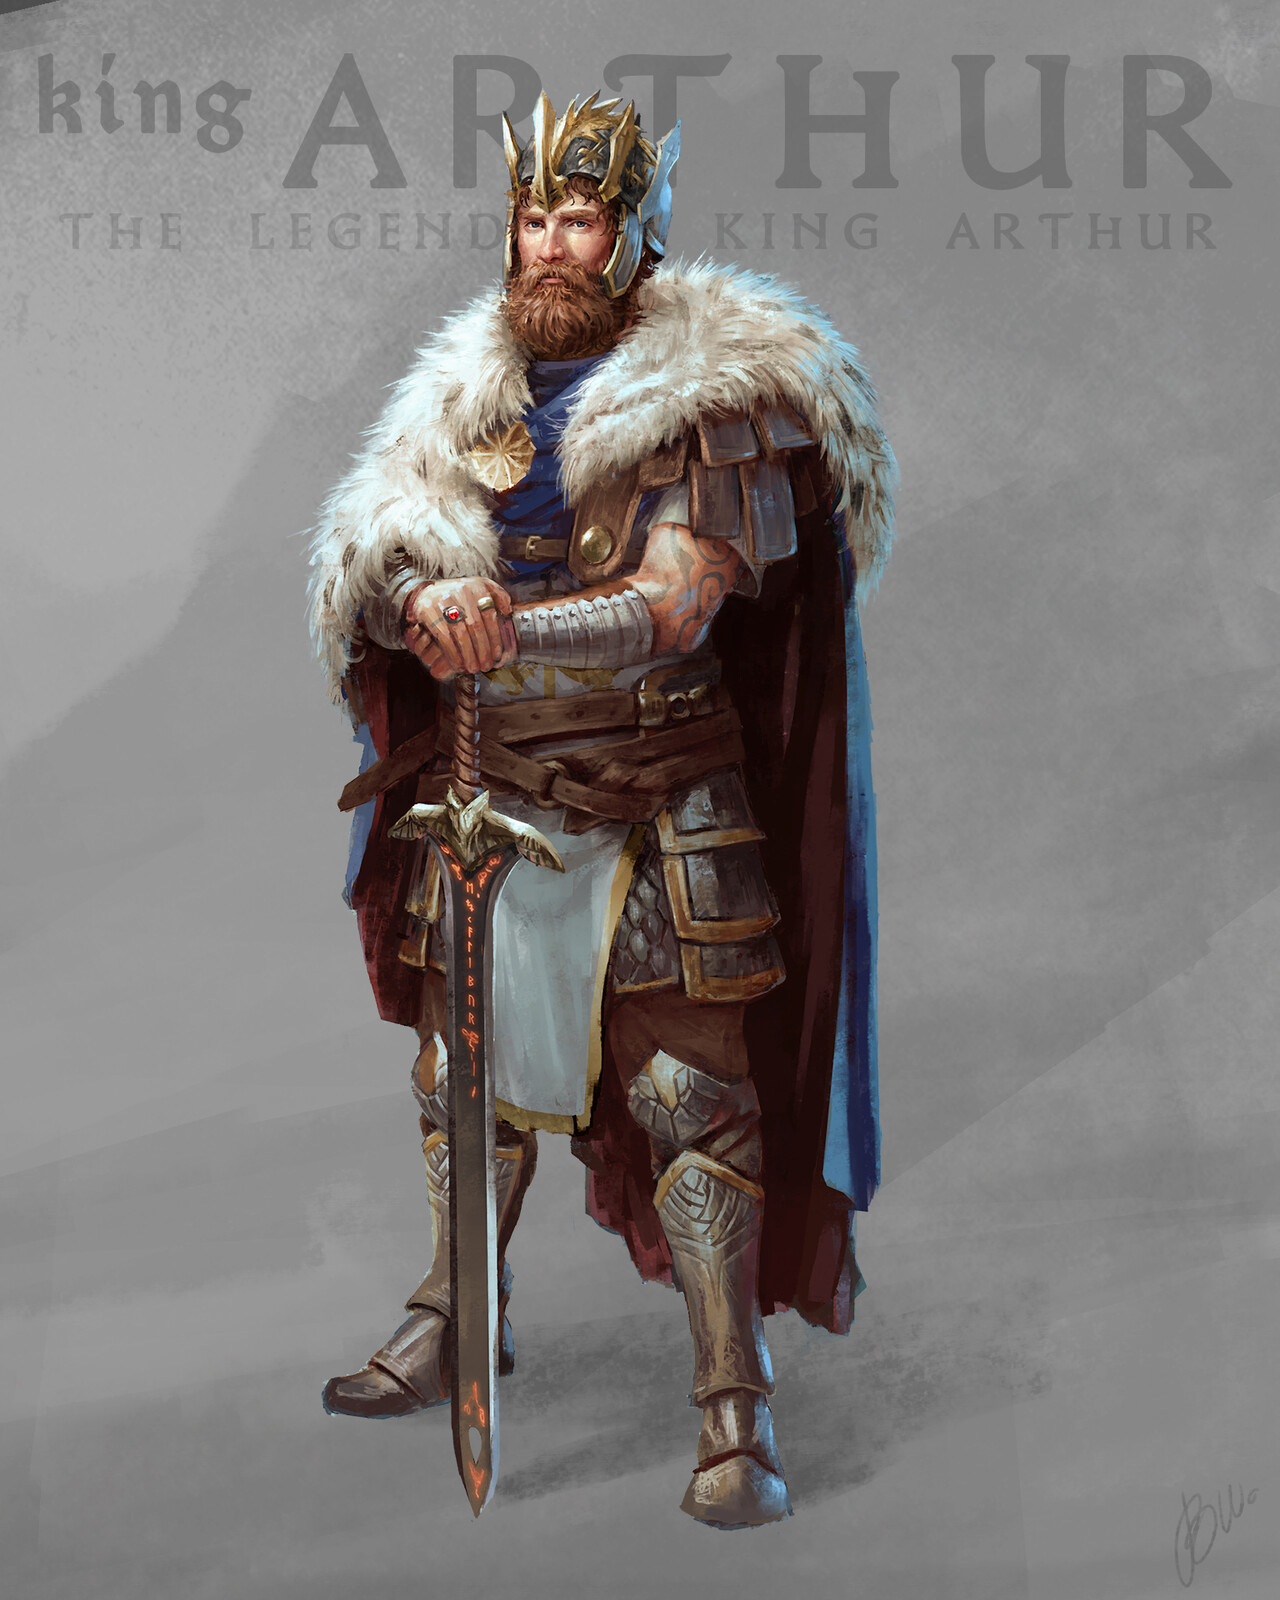 All grown up and with a couple of great fights under his belt, King Arthur now stands bold and wise.  Azure blue and gold are his traditional colors. Added white for purity, all colors are a bit linked to christian color meanings like the original story.